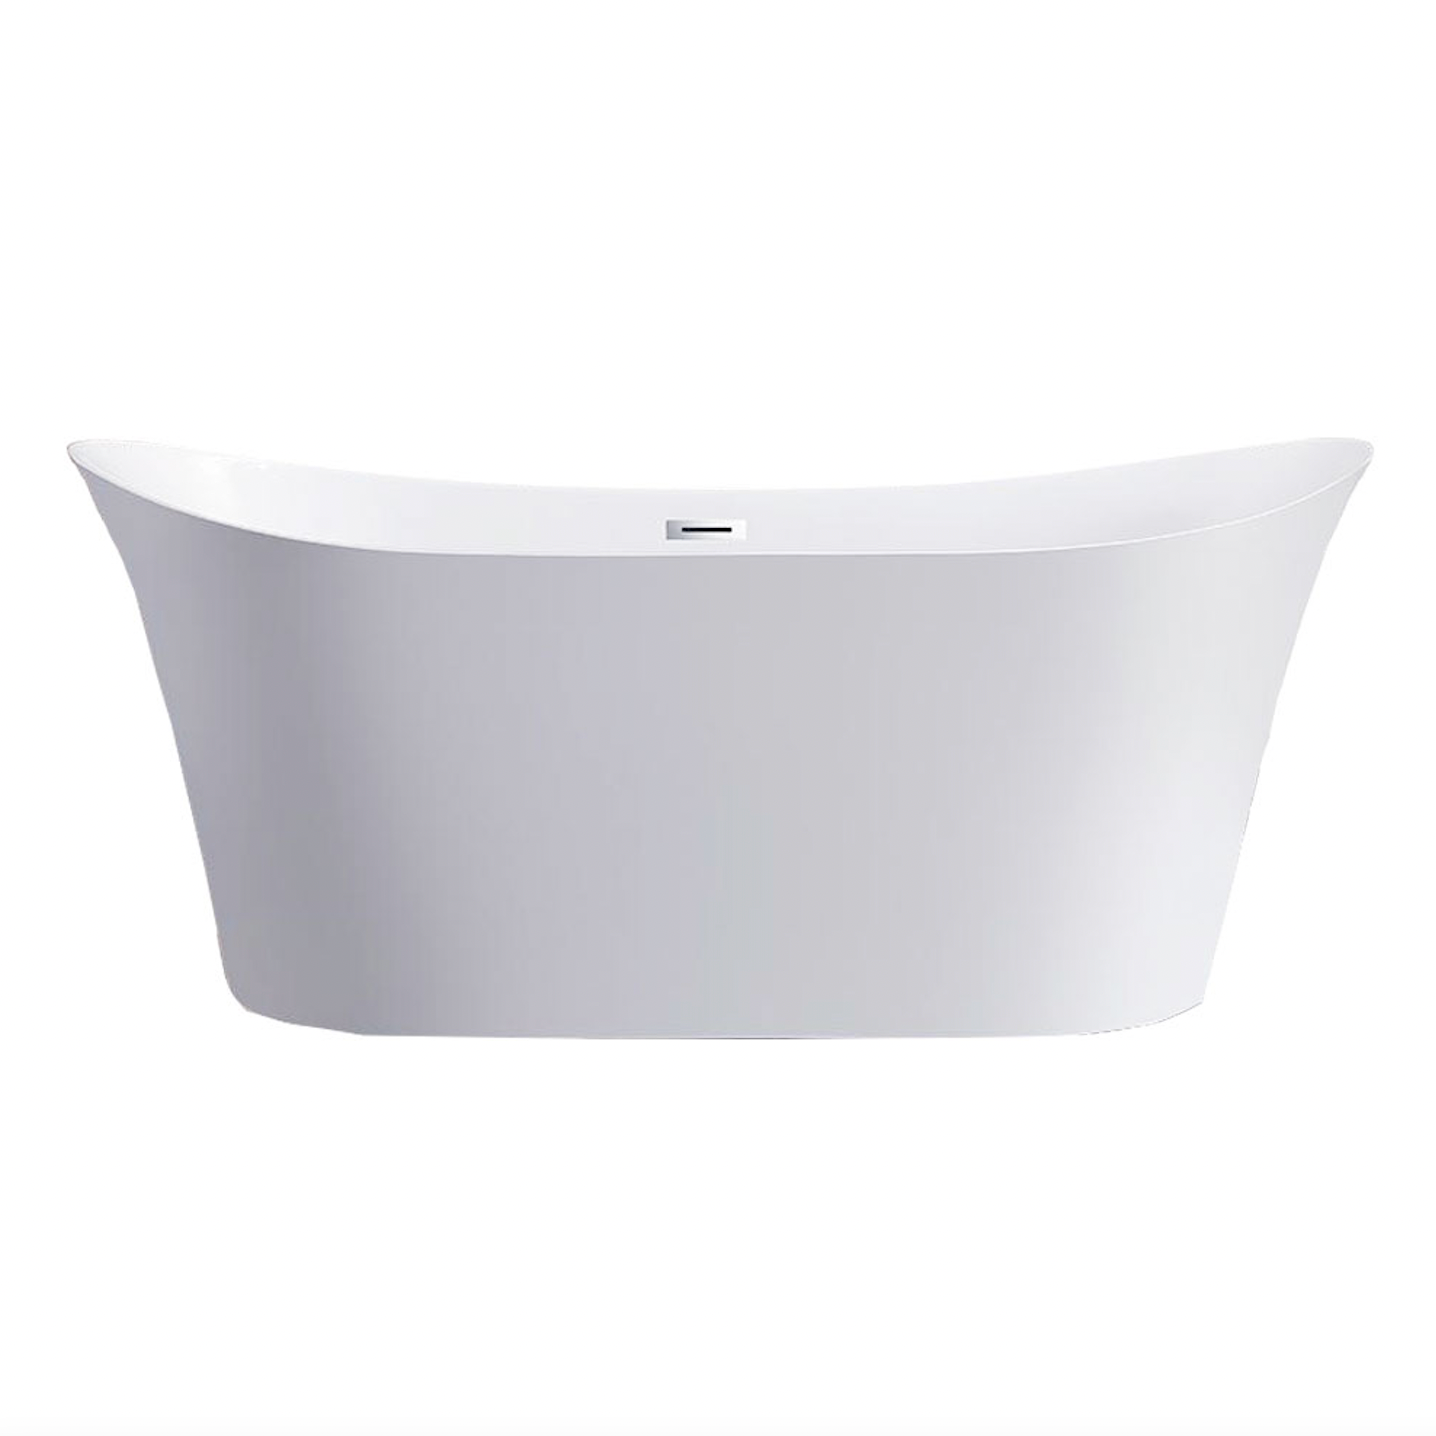 71" Acrylic Center Drain Oval Double Ended Flatbottom Freestanding Bathtub in Glossy White